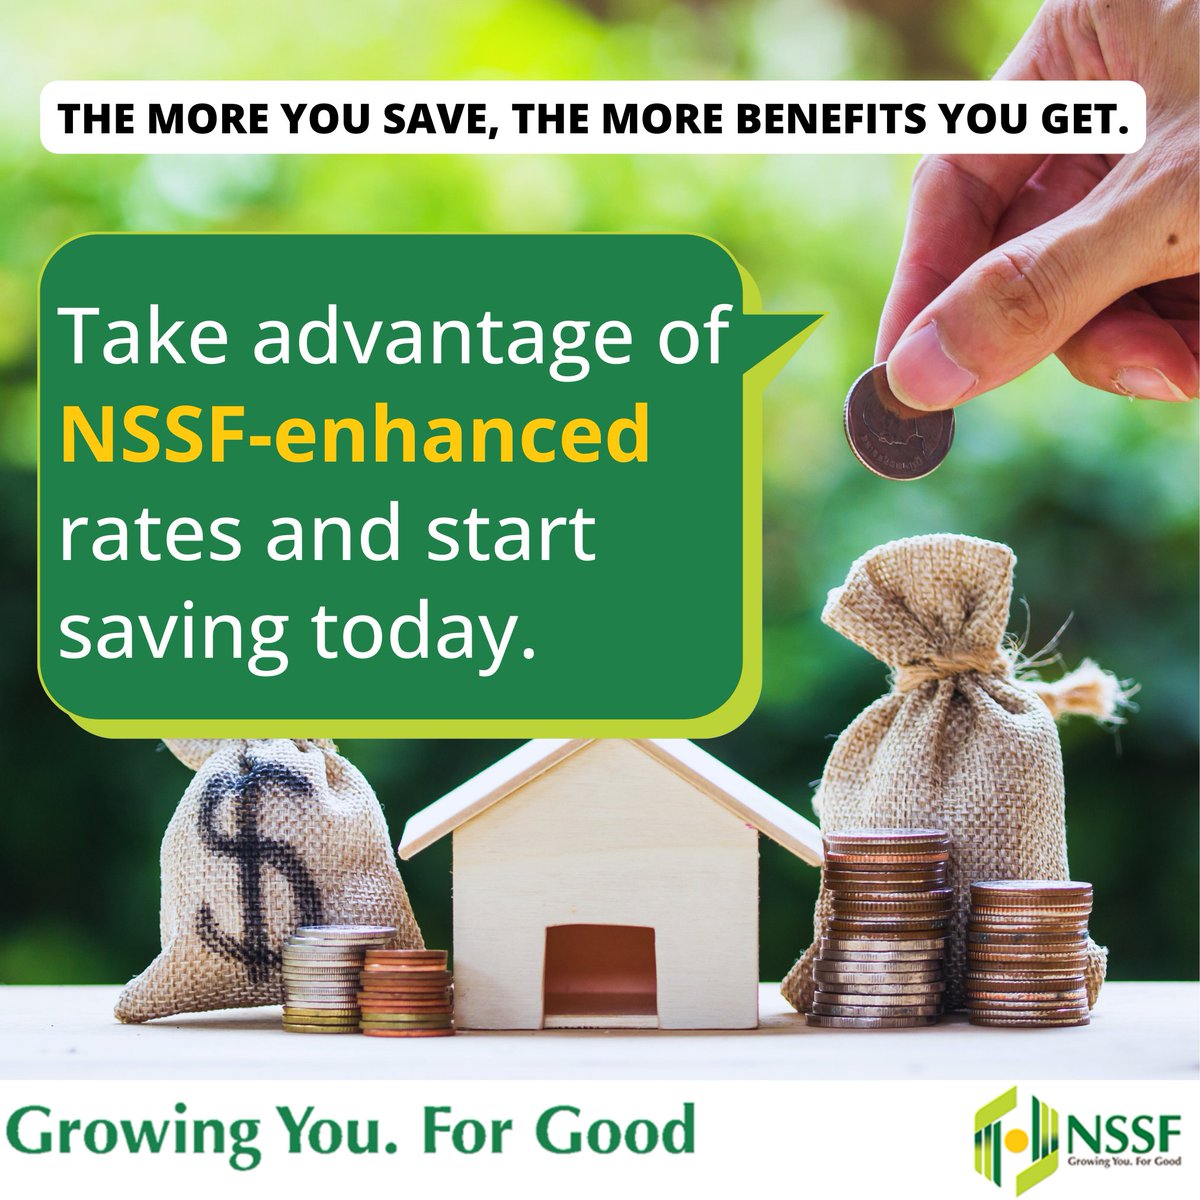 NSSF Enhanced rates let you save more for a rainy day. When you save more, your savings with NSSF grow exponentially and so are the benefits, giving you peace of mind when you retire. #LeavingNoOneBehind